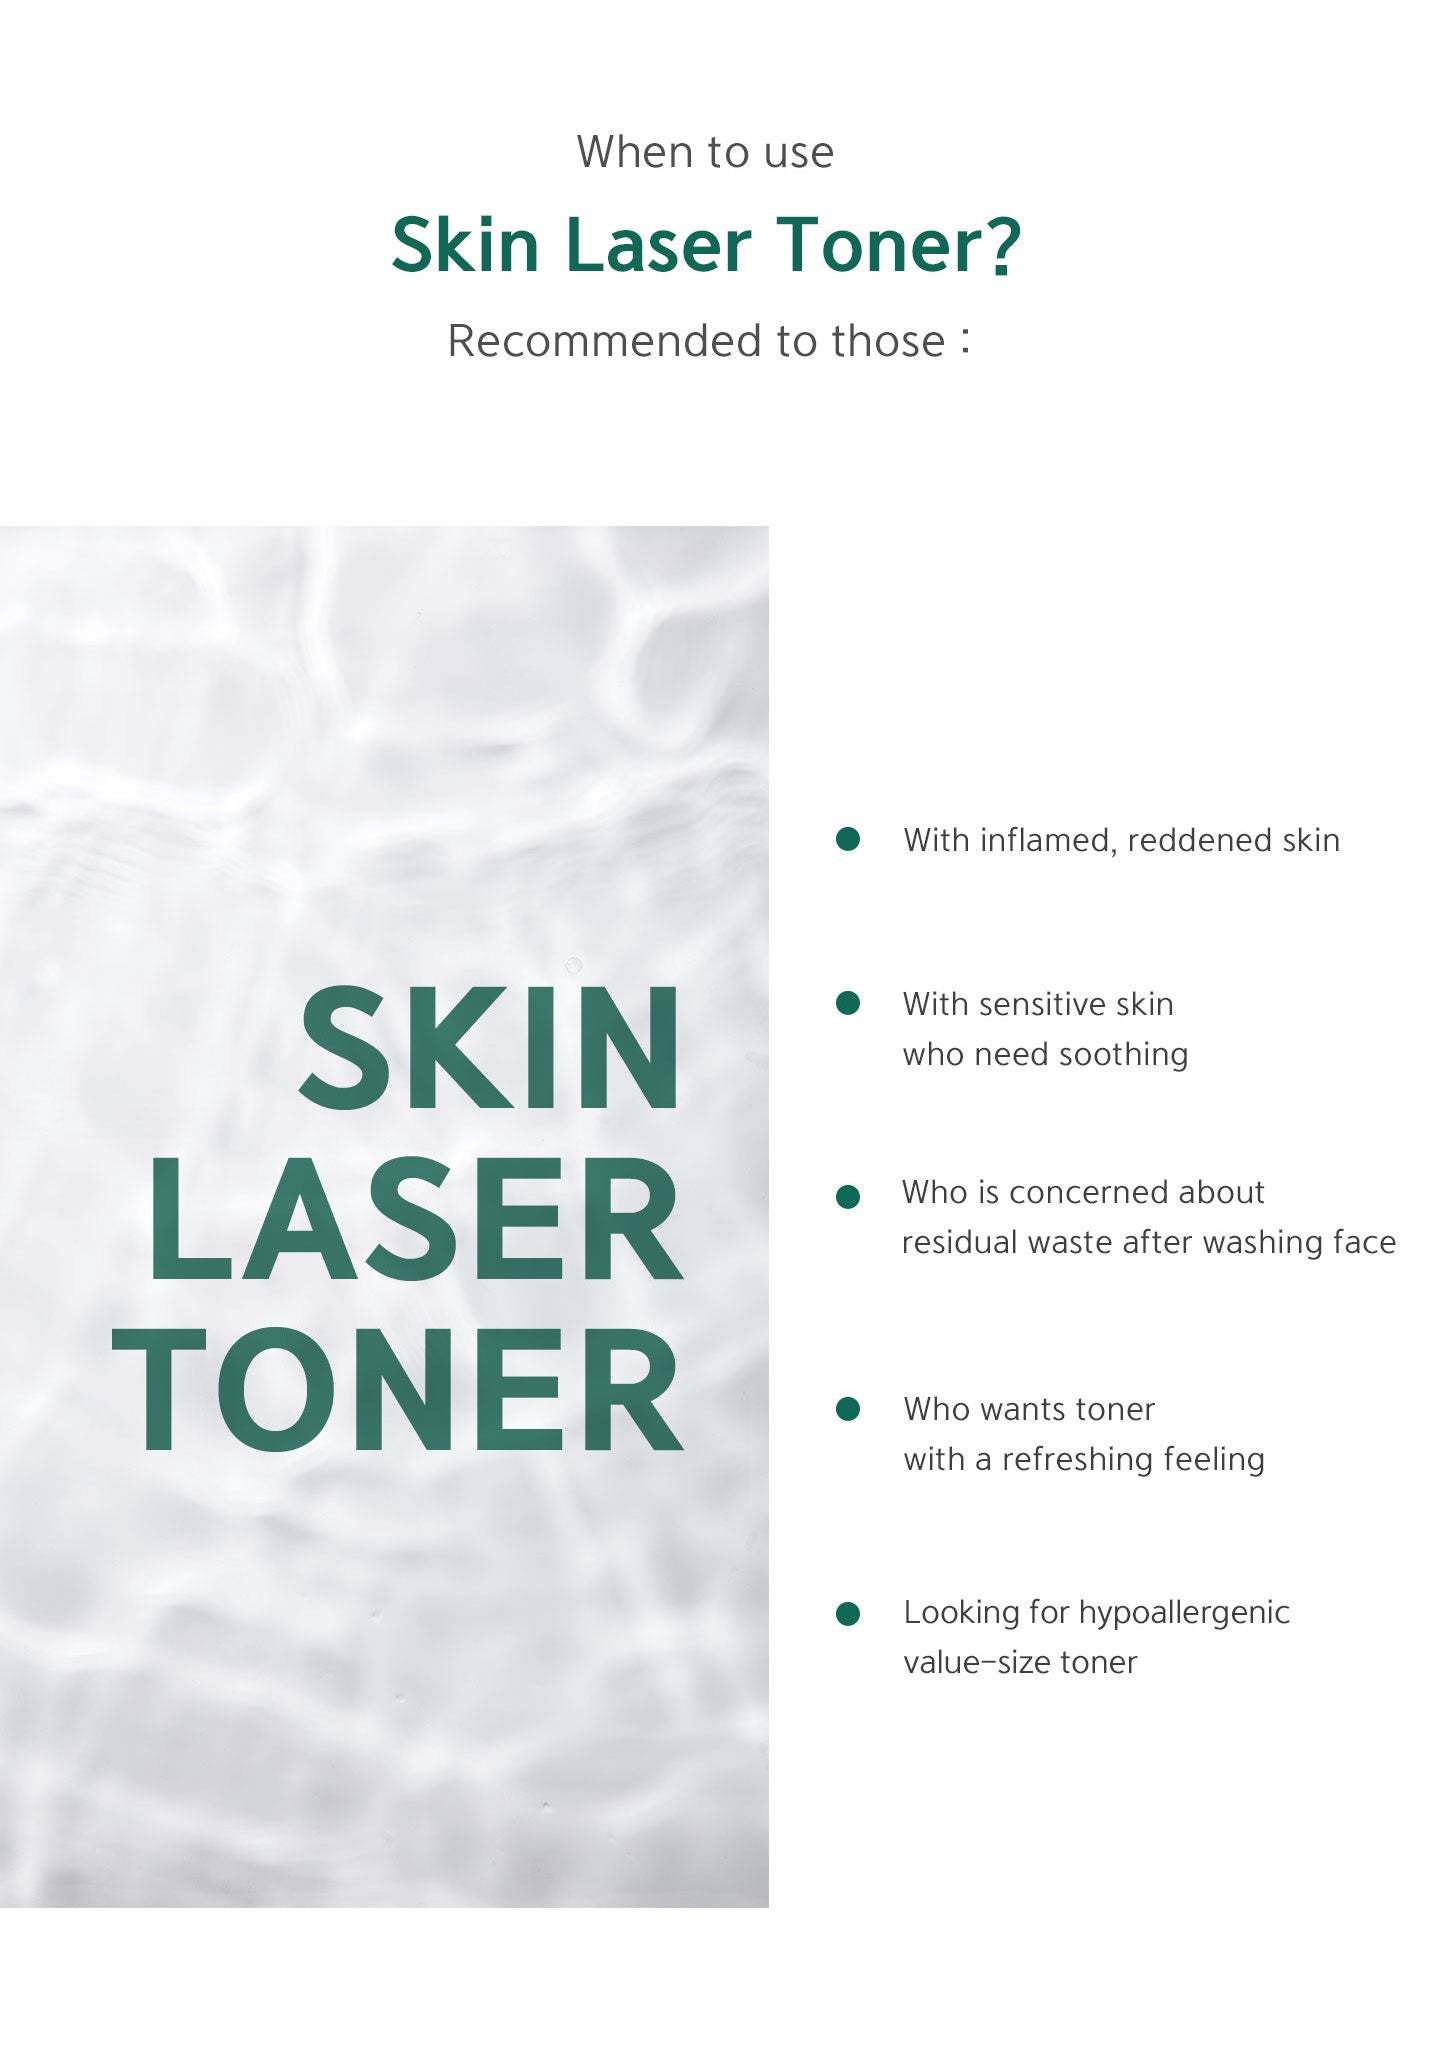 When to use skin laser toner? Recommended to those with inflamed, reddened skin, sensitive skin who need soothing, concerned about residual waste after washing face, wants toner with a refreshing feeling, looking for hypoallergenic value-size toner. 